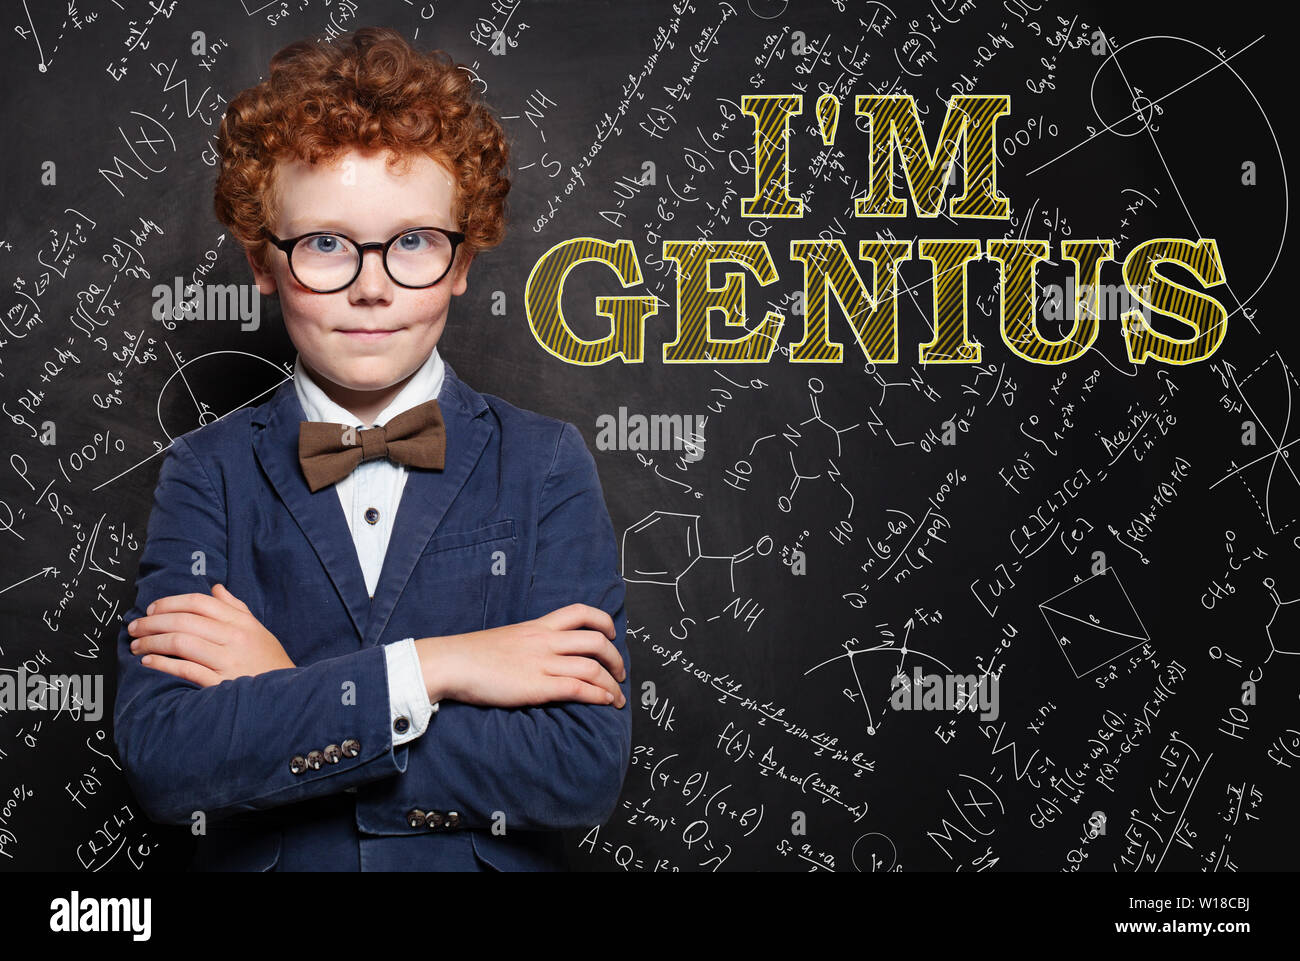 Smart kid genius on chalkboard background with science and maths formula Stock Photo